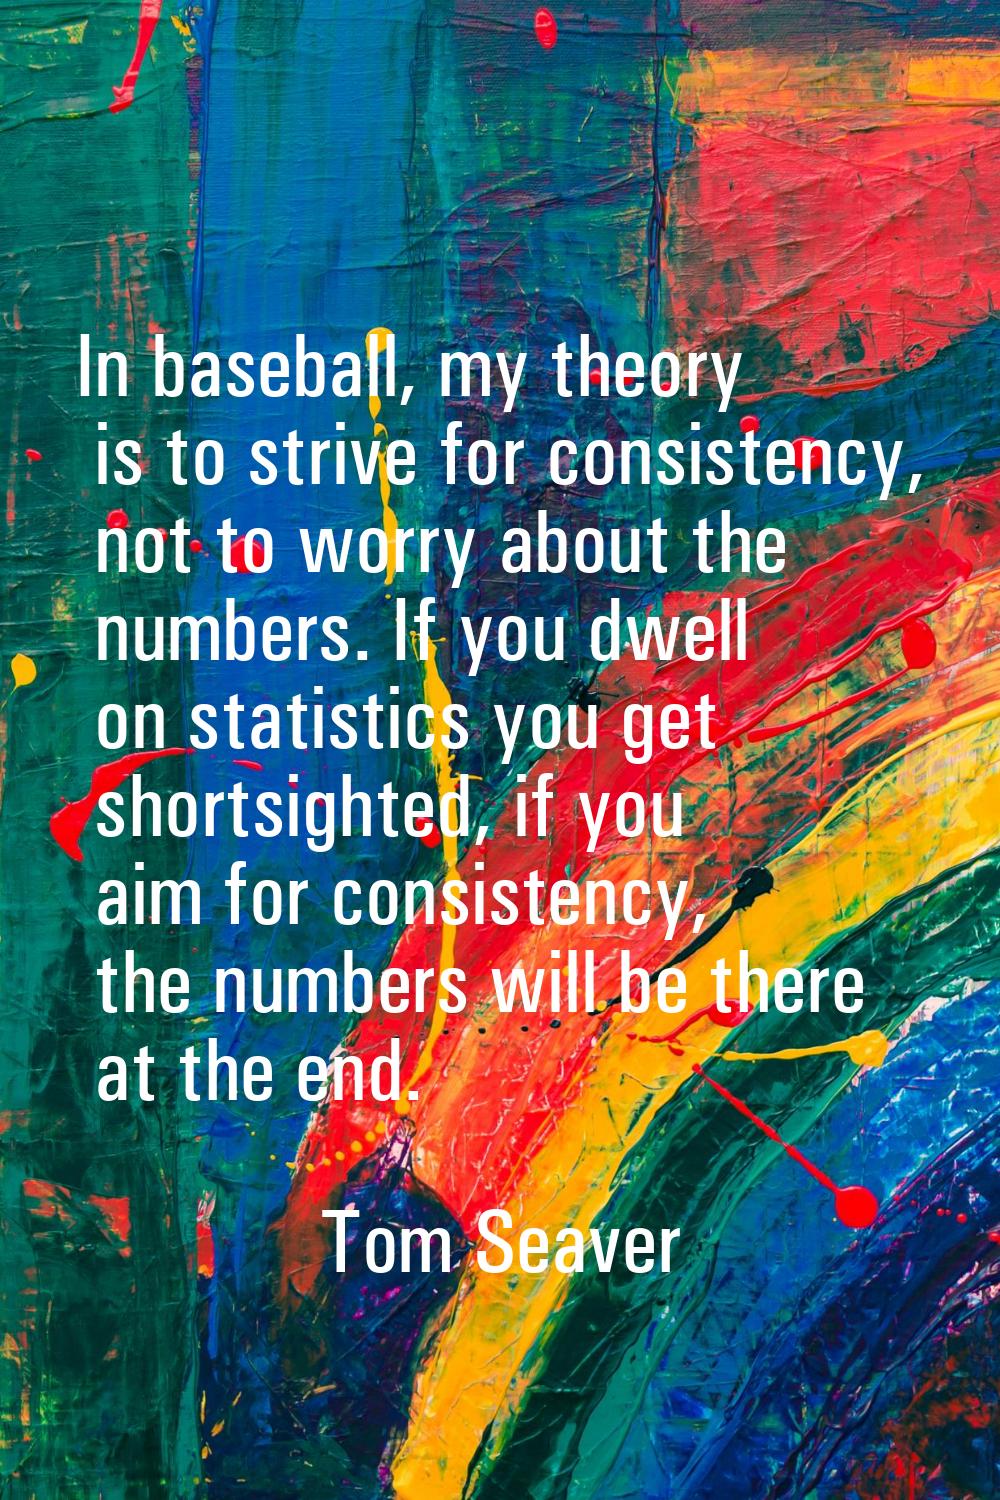 In baseball, my theory is to strive for consistency, not to worry about the numbers. If you dwell o